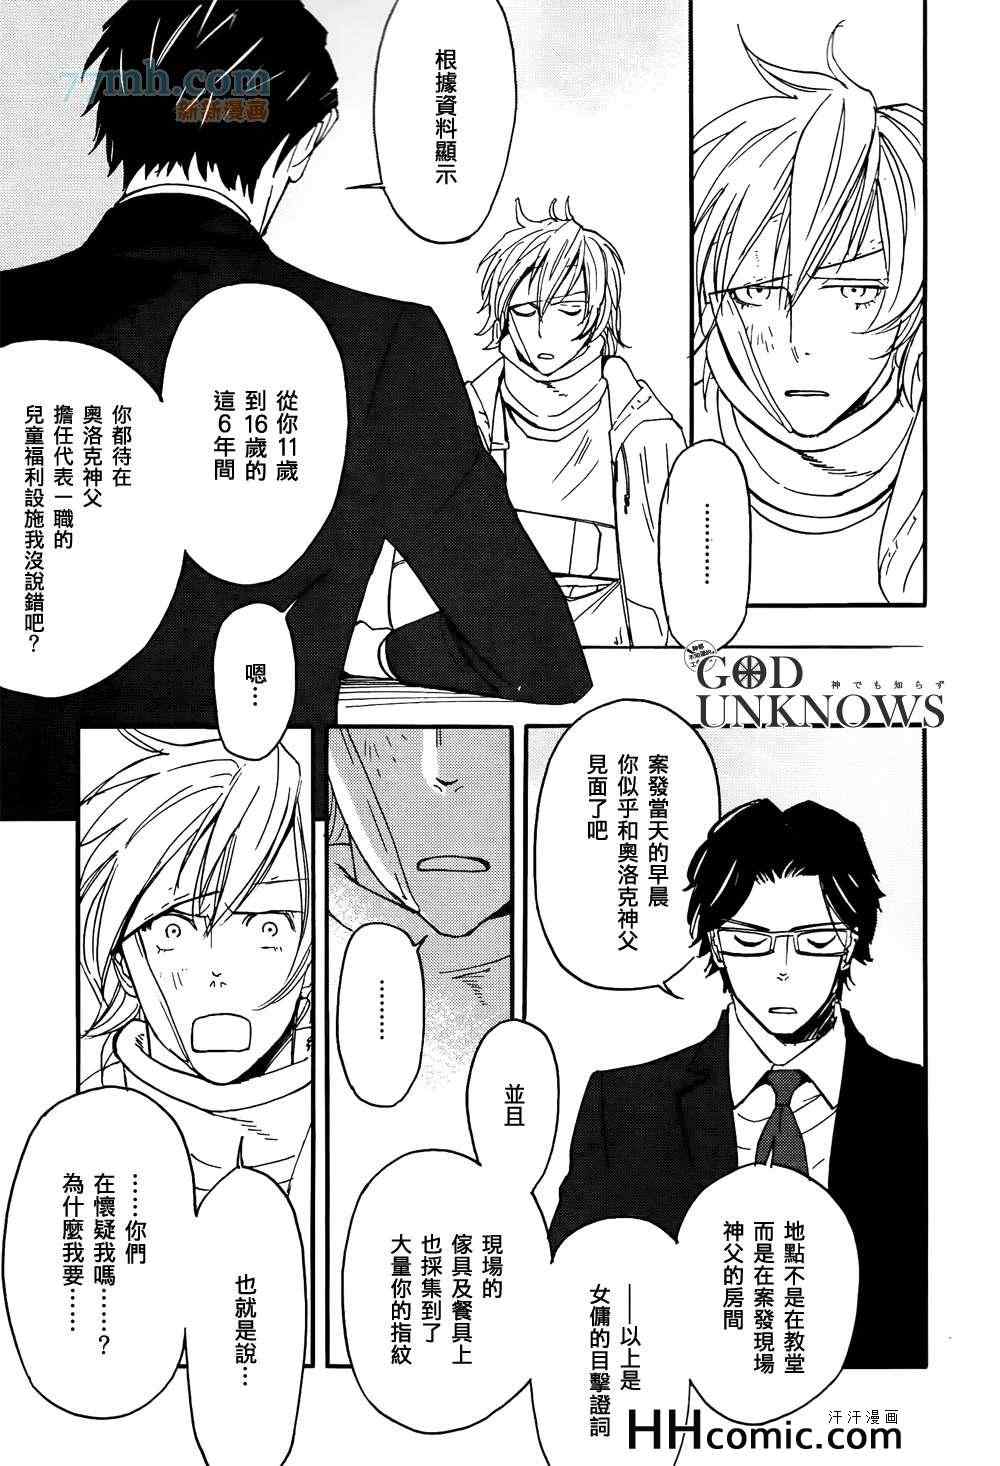 《Lost and Found》漫画 Found 002集